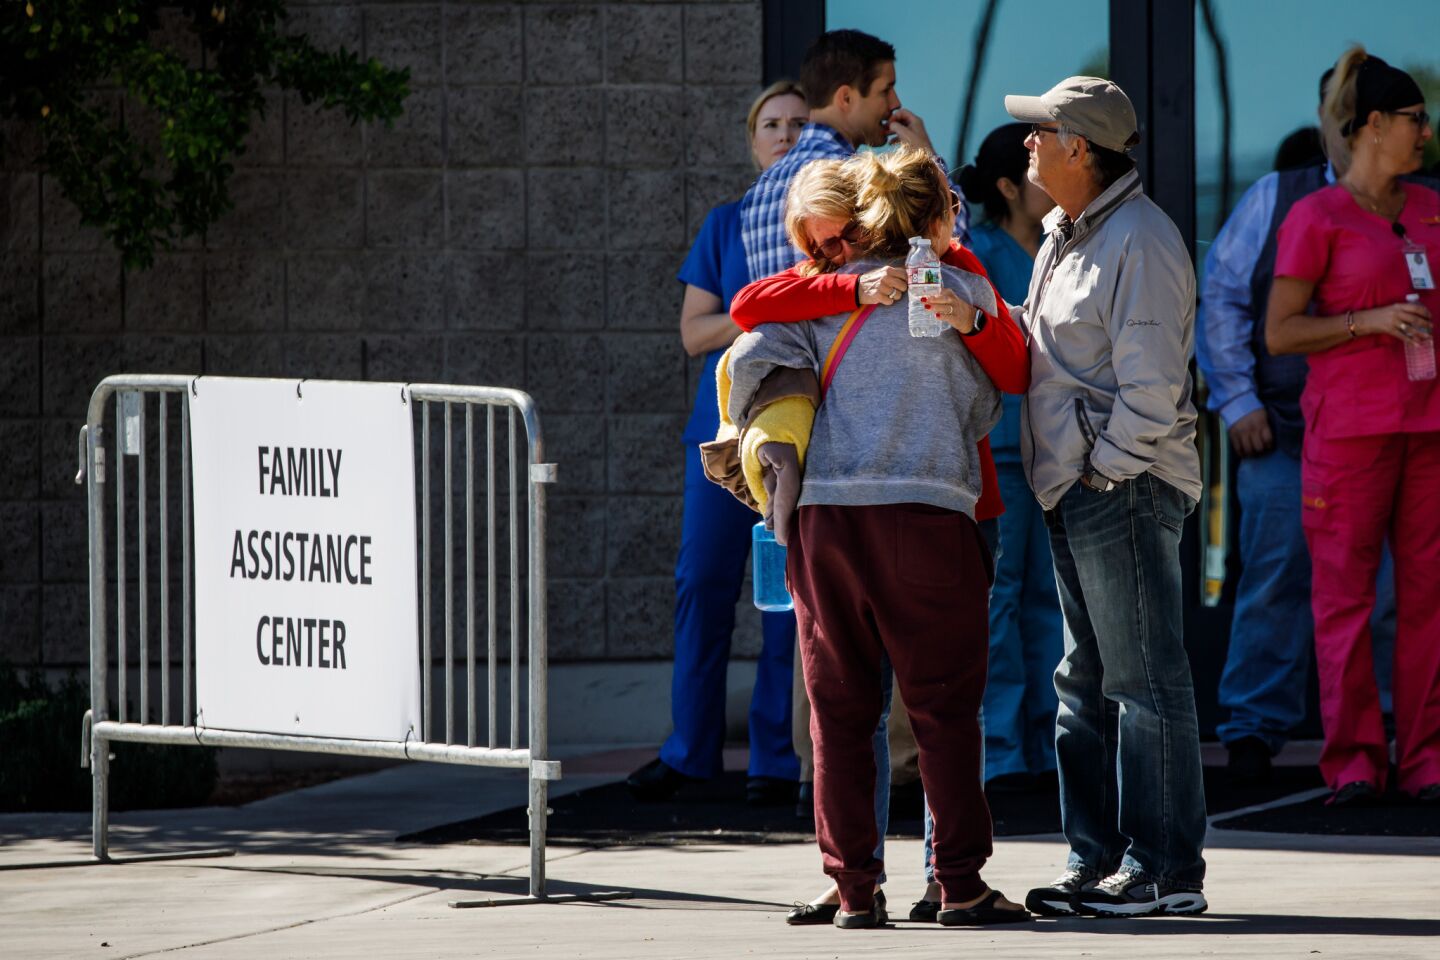 Relatives of victims from the mass shooting embrace outside a family assistance center in Las Vegas.